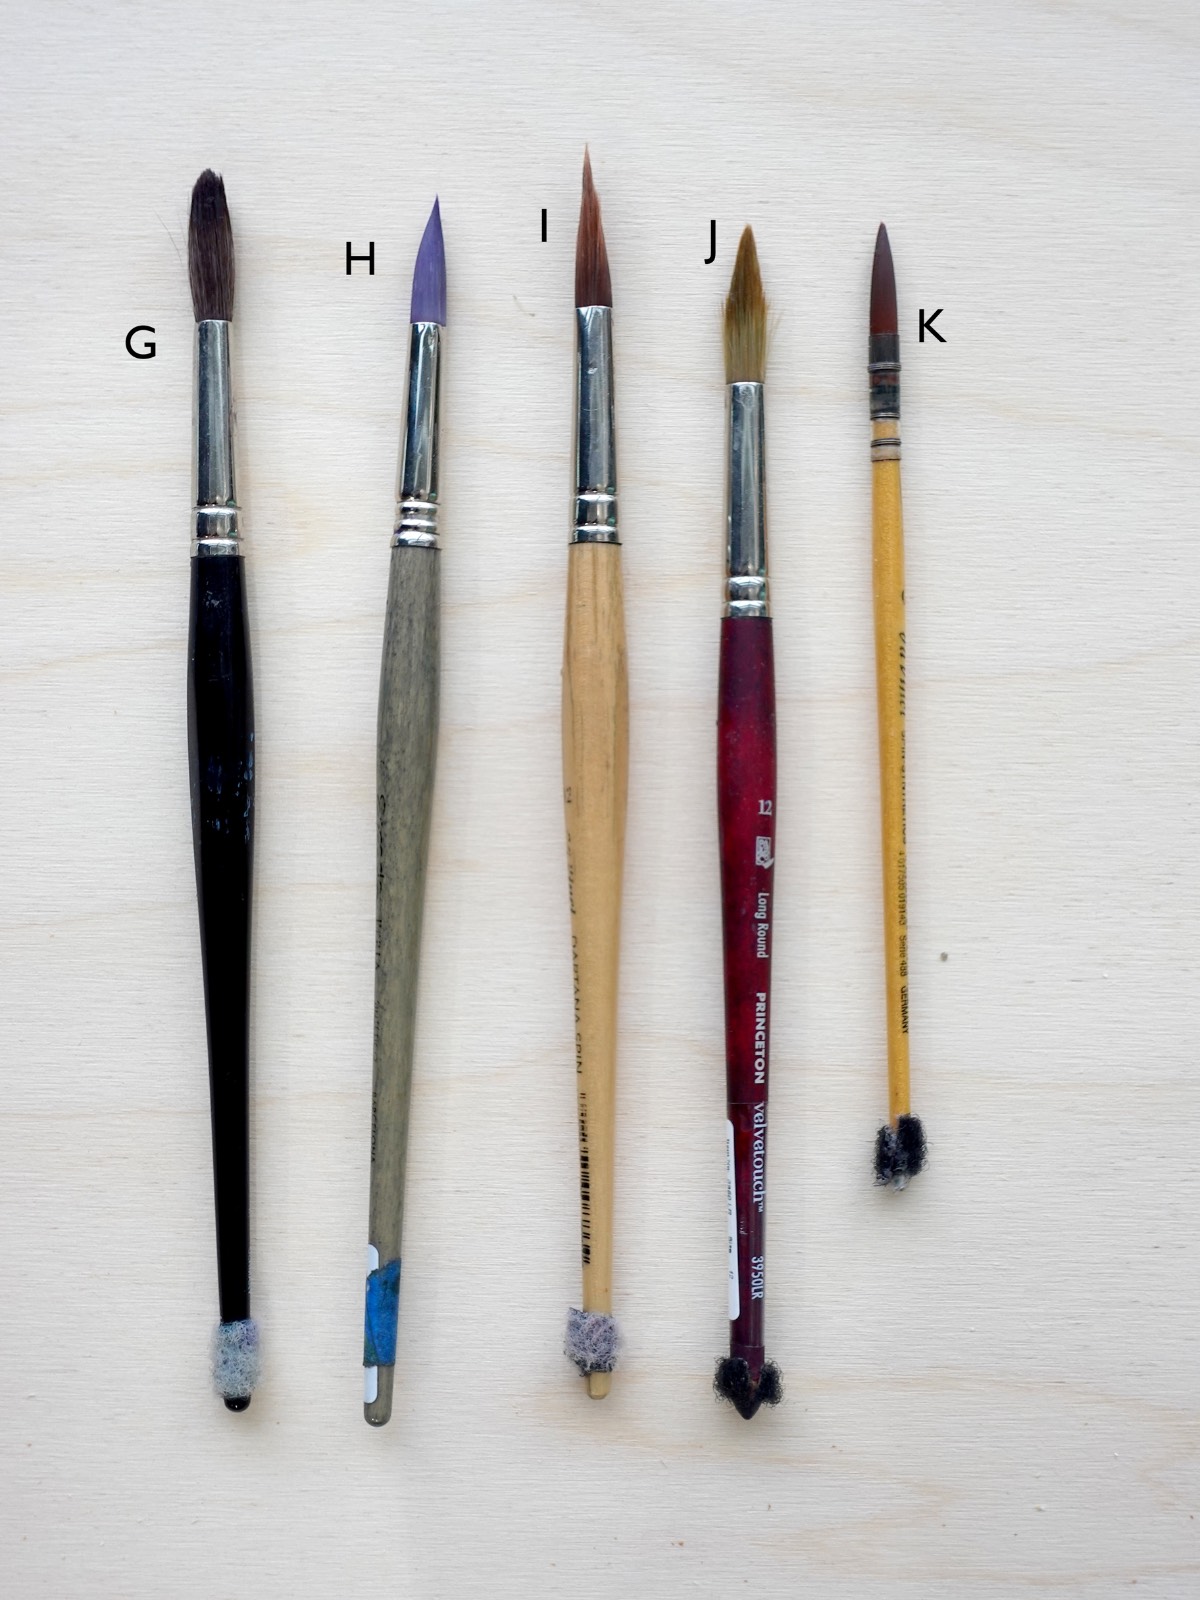 Are You Using the Right Brush for the Job? - American Watercolor